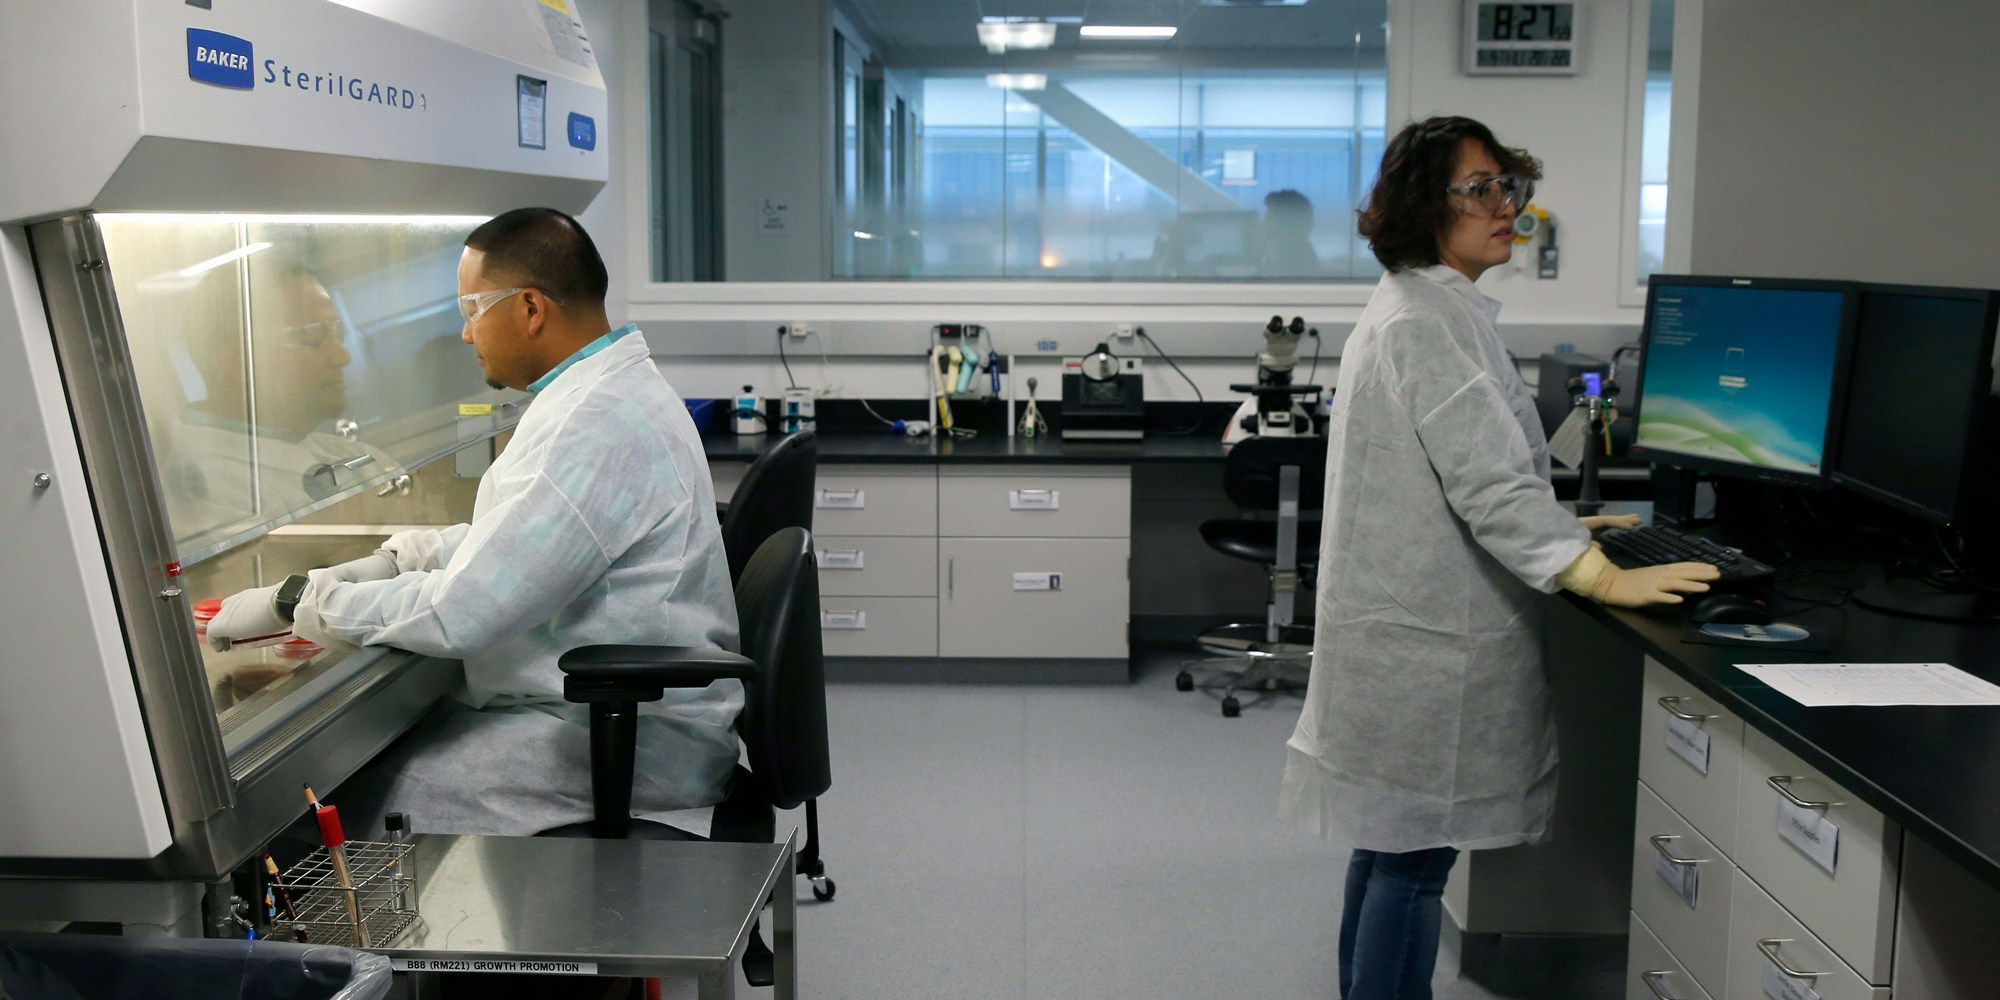 Markus Punsulan and Sol Nho work inside one of the labs at the Bayer pharmaceutical and biotech campus in Berkeley, Calif. on Thursday, May 9, 2019. Bayer is breaking ground on its Cell Culture Technology Center. (Photo by Paul Chinn/San Francisco Chronicle via Getty Images)